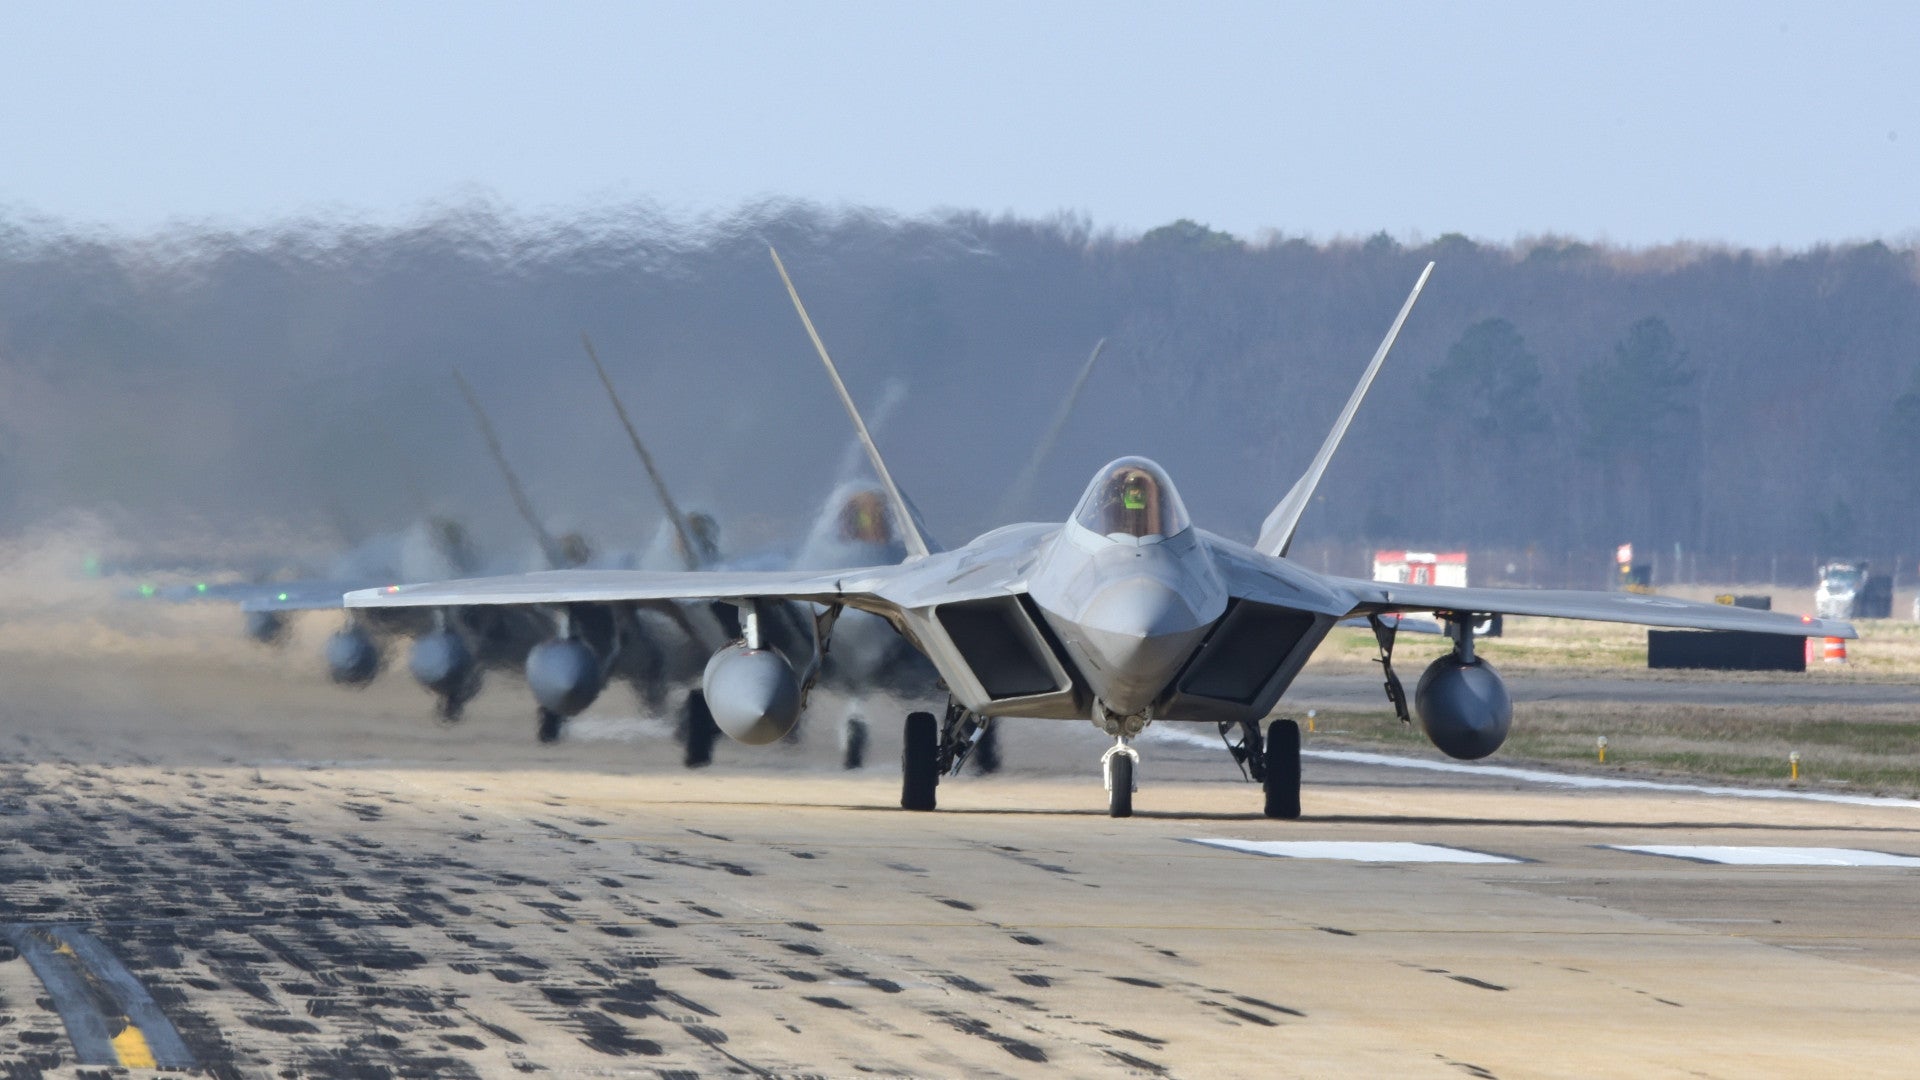 The USAF’s Plan To Move F-22 Training Could Make Langley Air Force Base Raptor Central